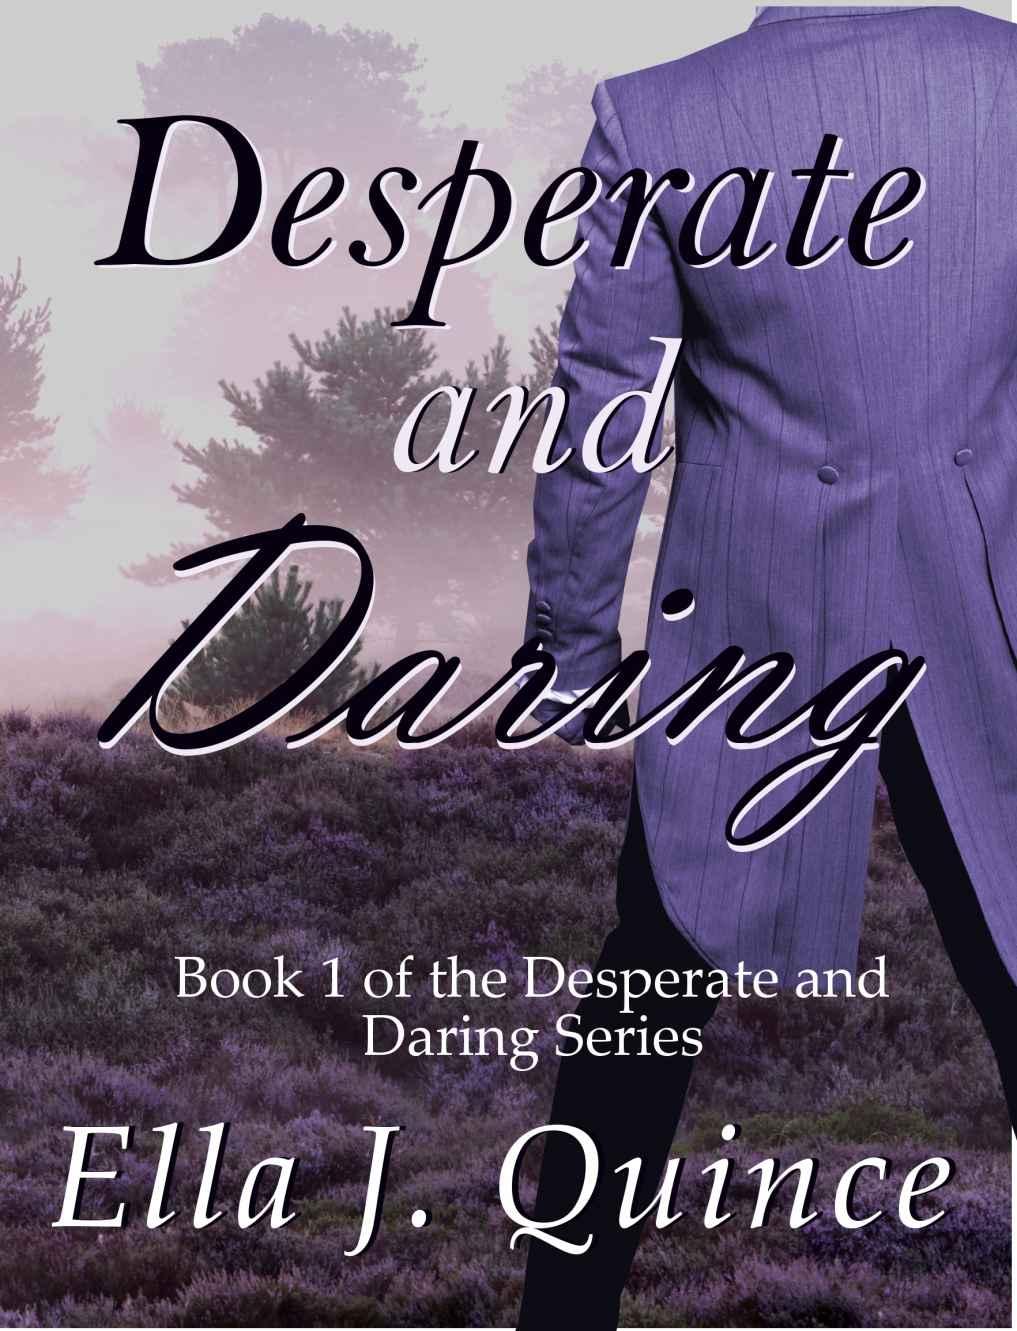 Desperate and Daring 01 - Desperate and Daring by Ella J. Quince